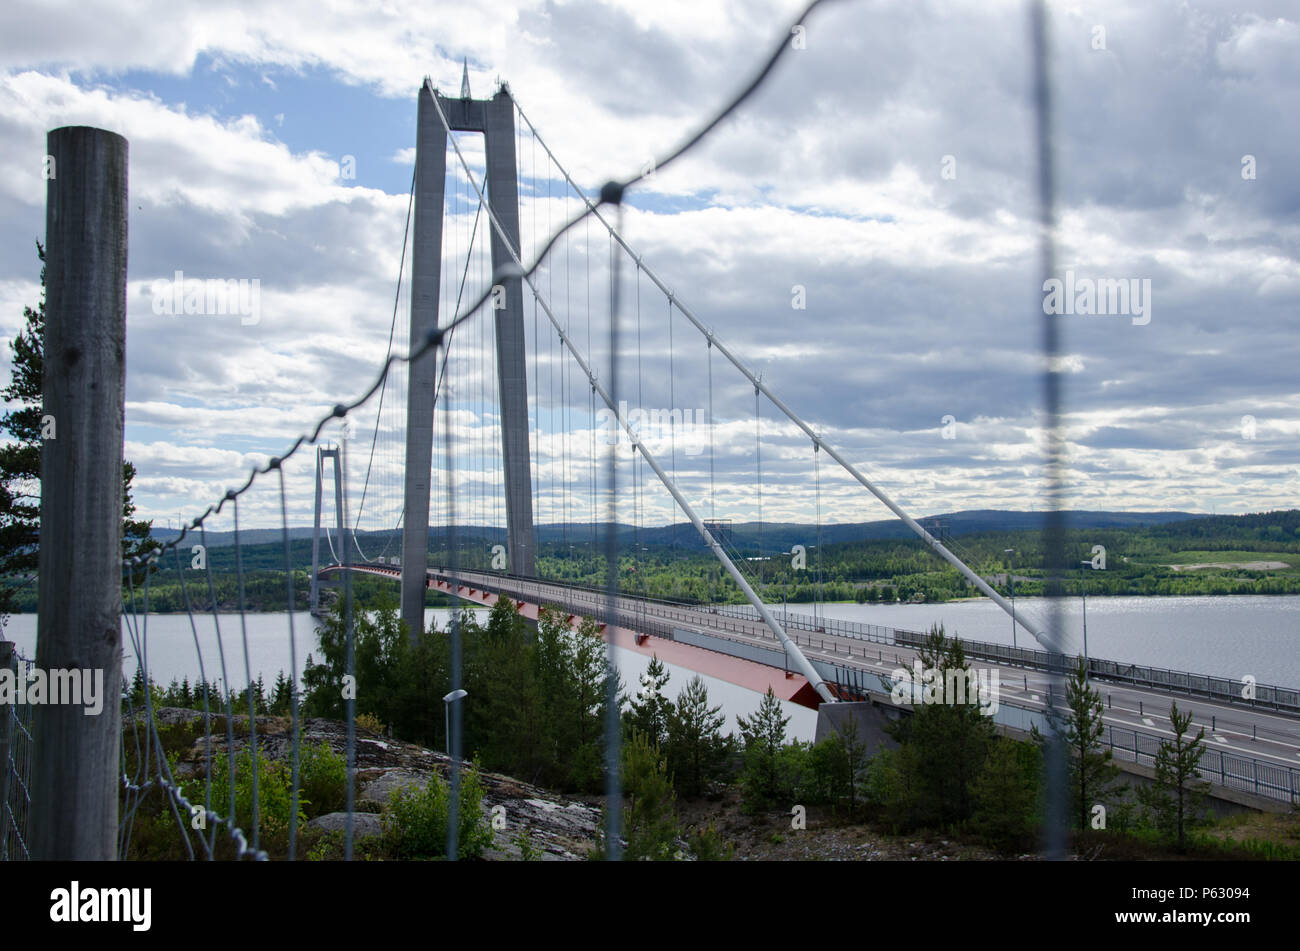 High coast, Sweden - 13 June 2018. The view from Hotel High coast of the bridge over the gulf of Bothnia on a slightly cloudy day Stock Photo